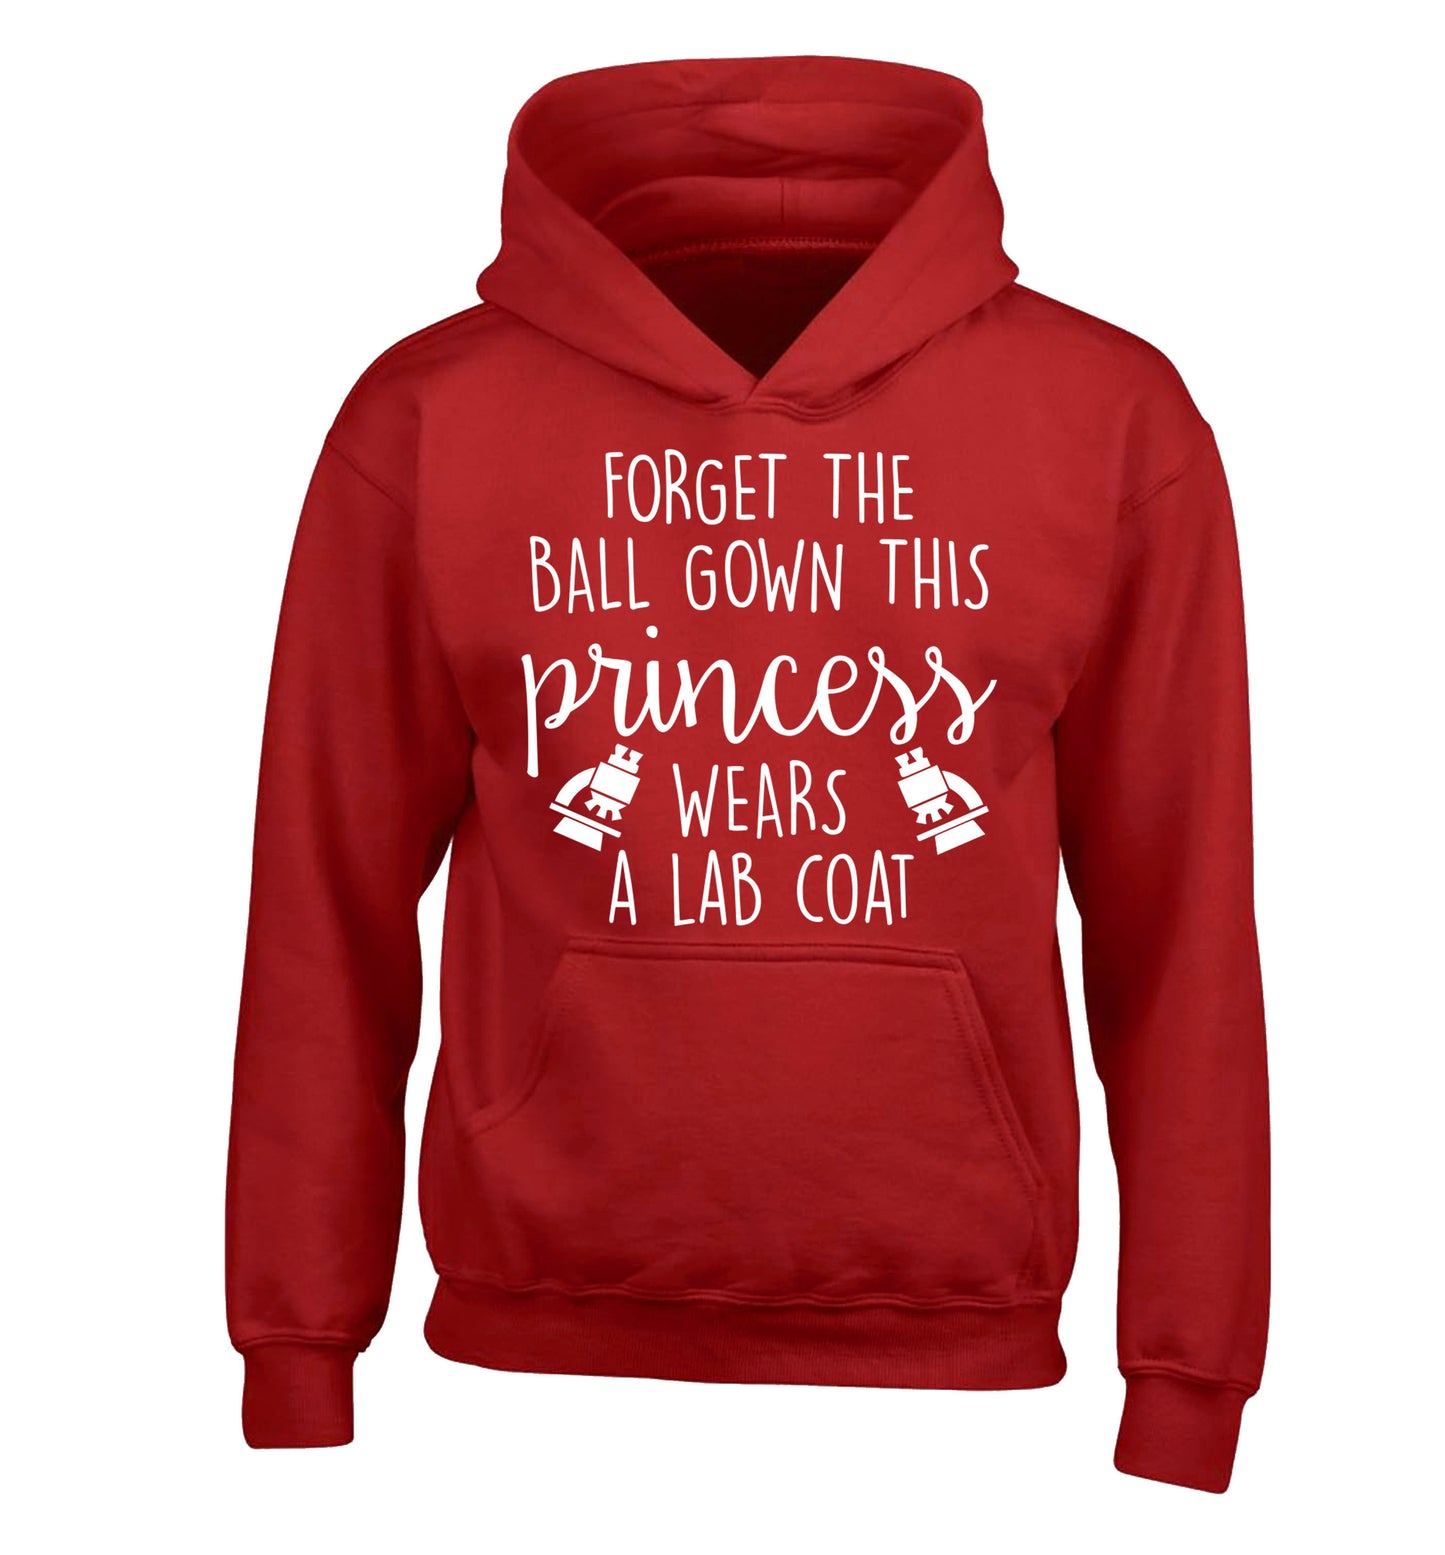 Forget the ball gown this princess wears a lab coat children's red hoodie 12-14 Years